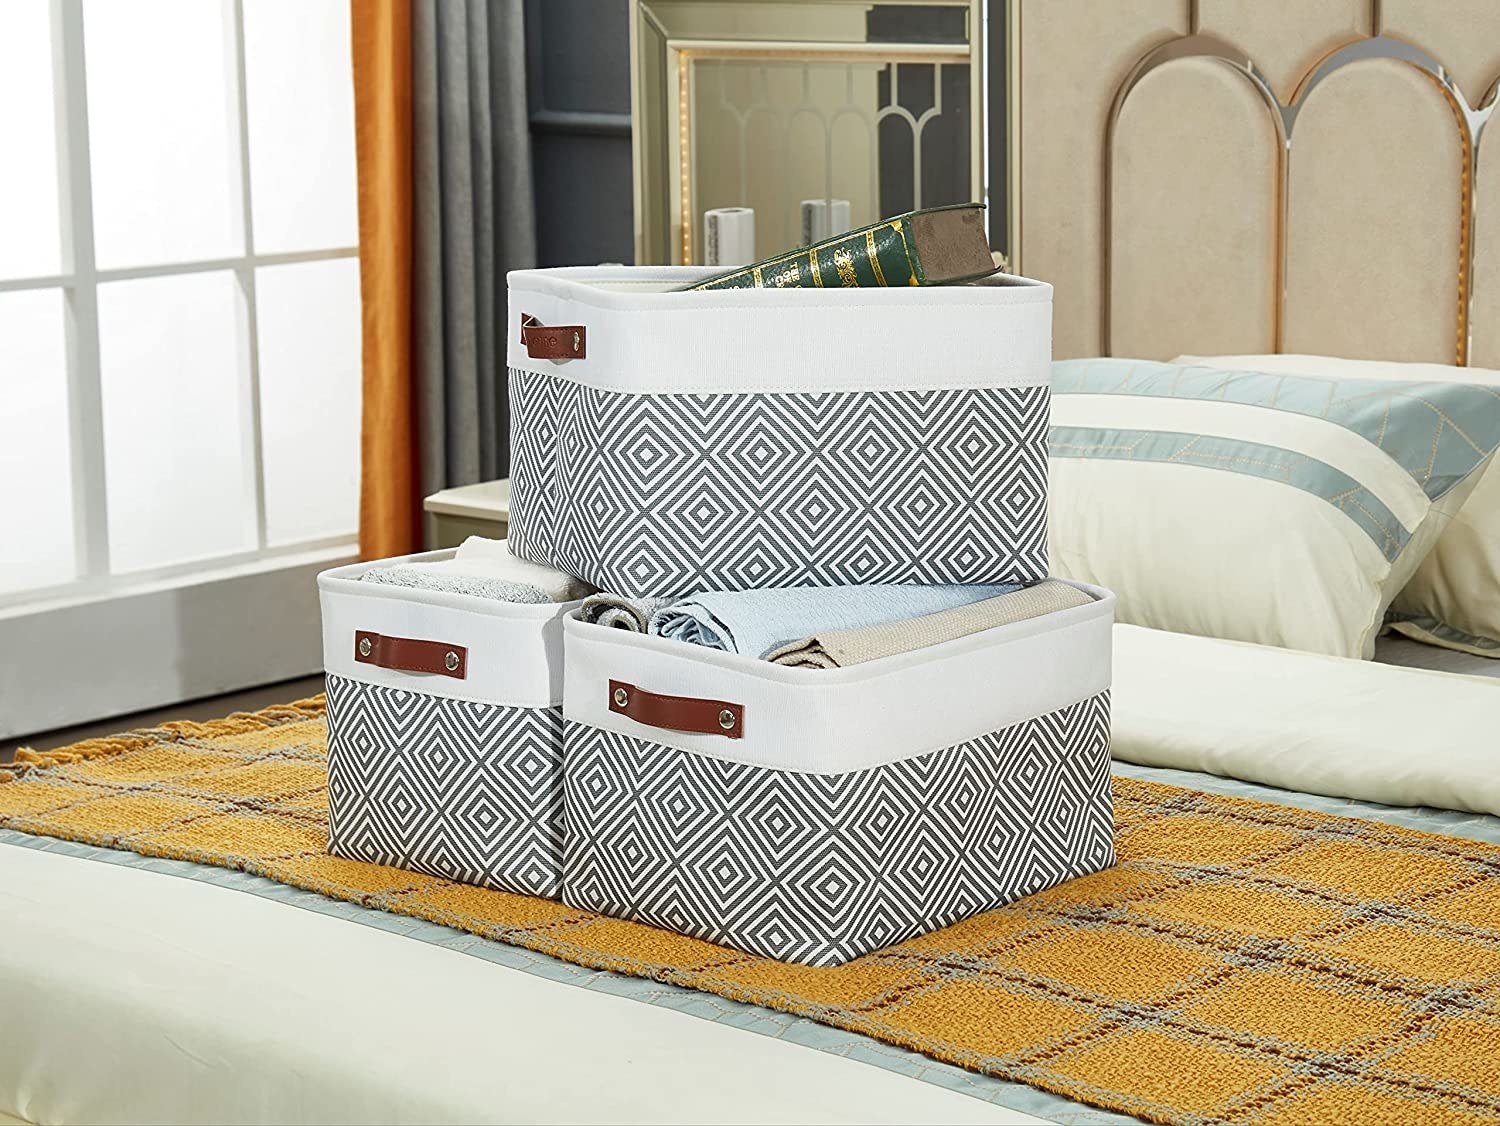 three fabric baskets on a bed